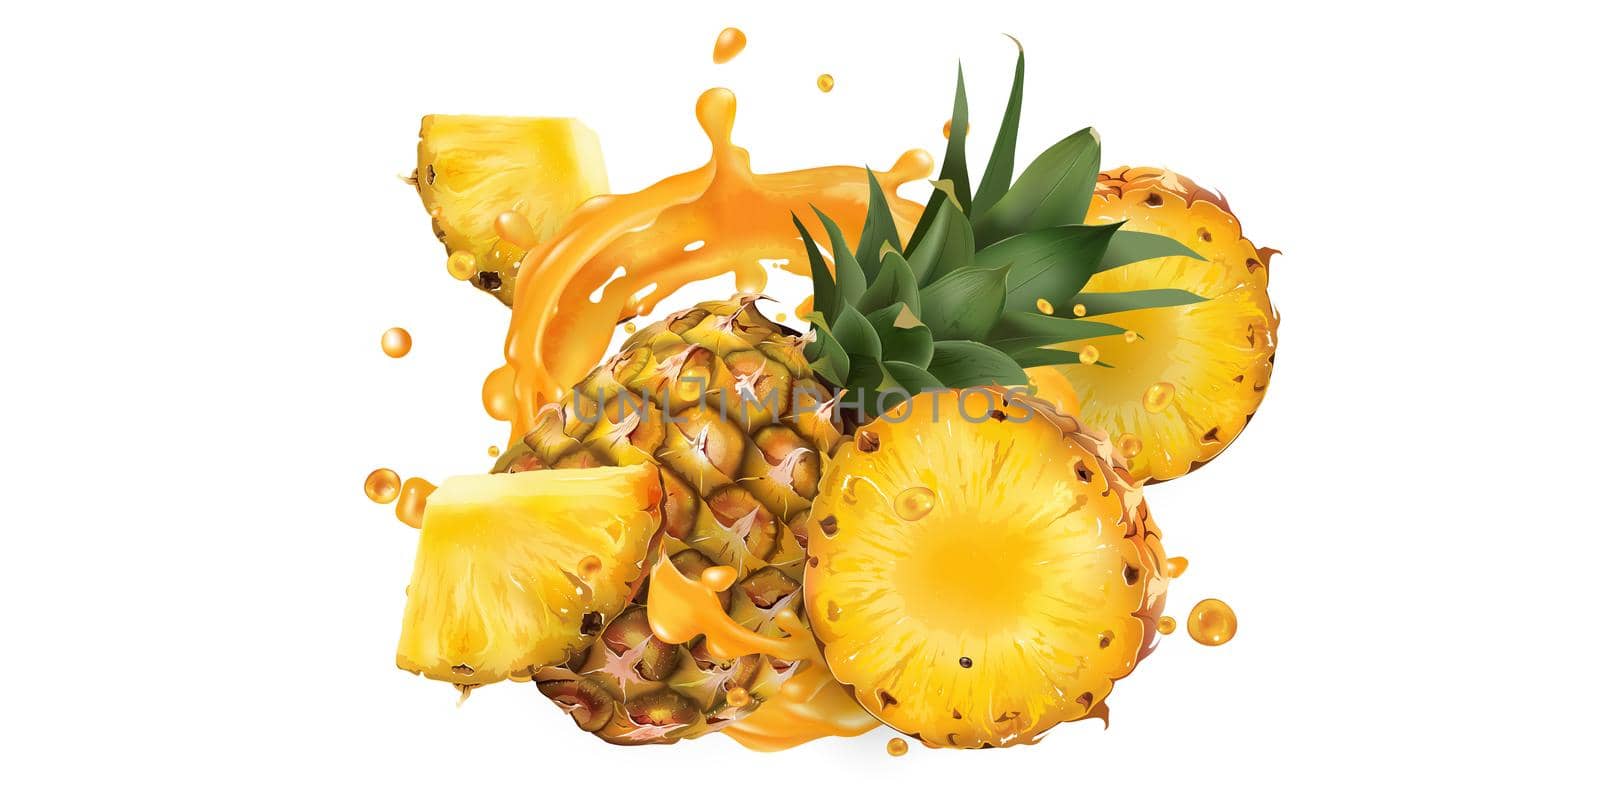 Whole and sliced pineapple in fruit juice splashes on a white background. Realistic style illustration.